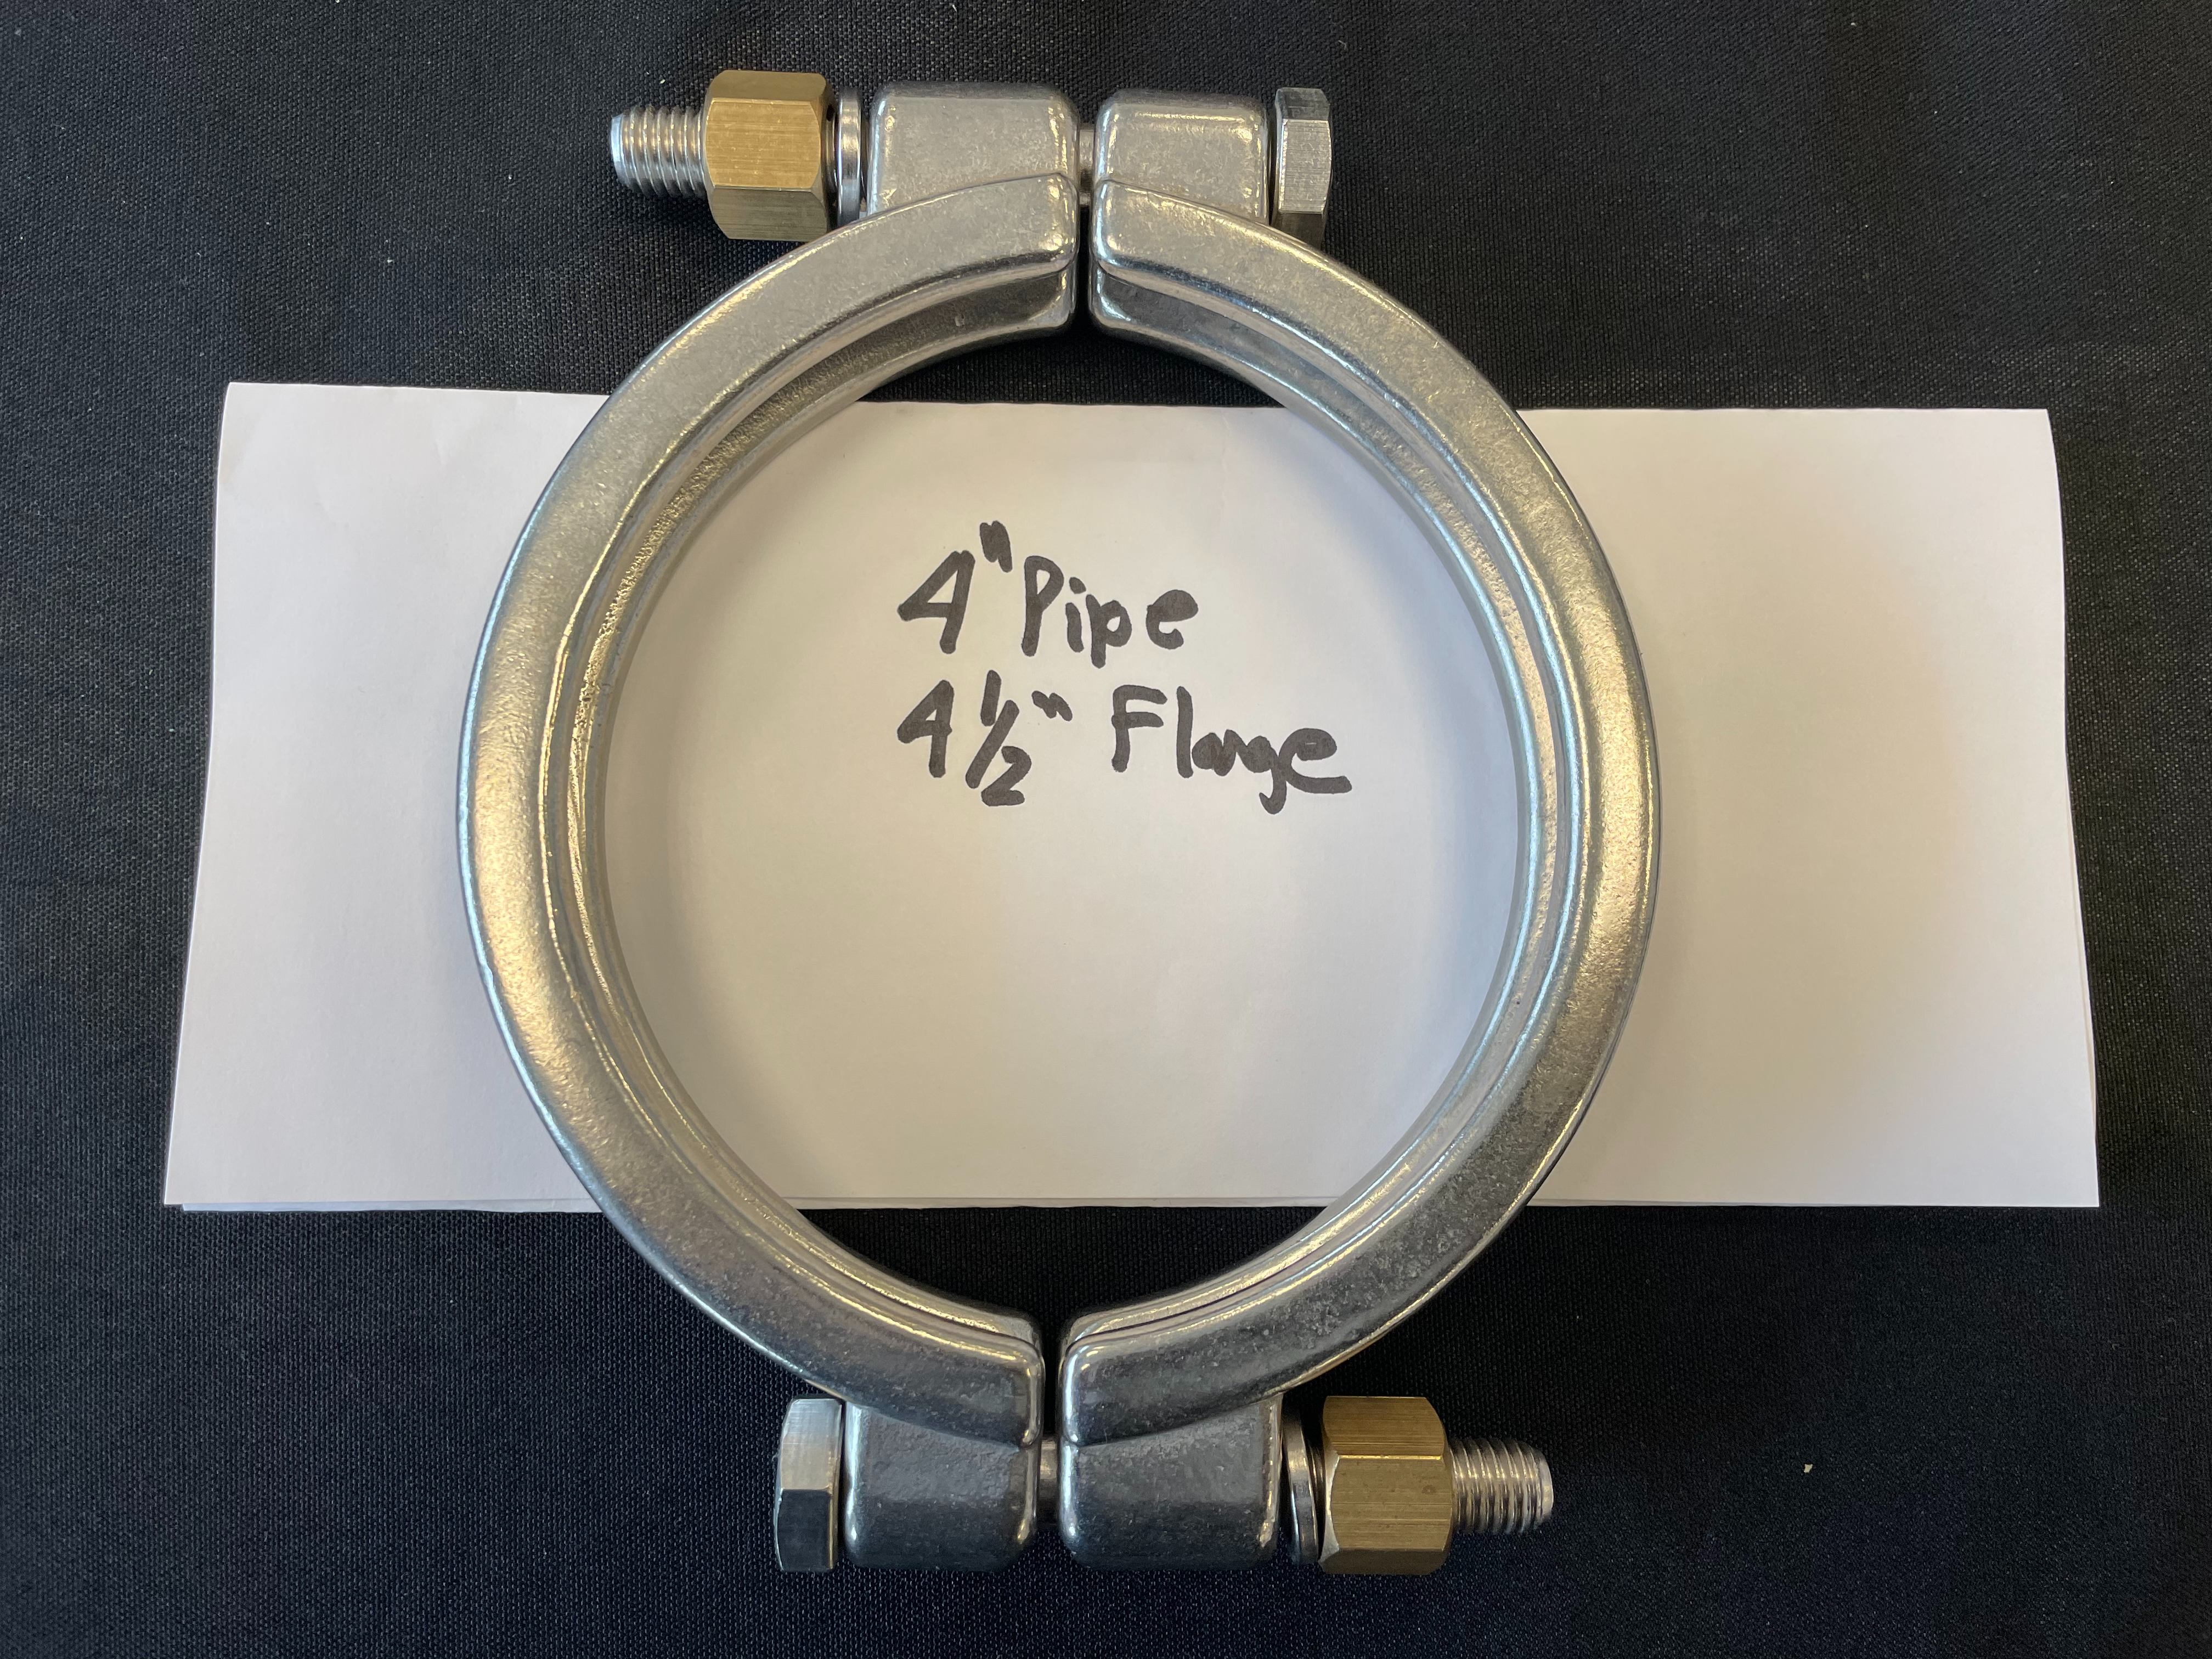 Bolted High Pressure Sanitary Clamp - 4" Pipe/4.5" Flange